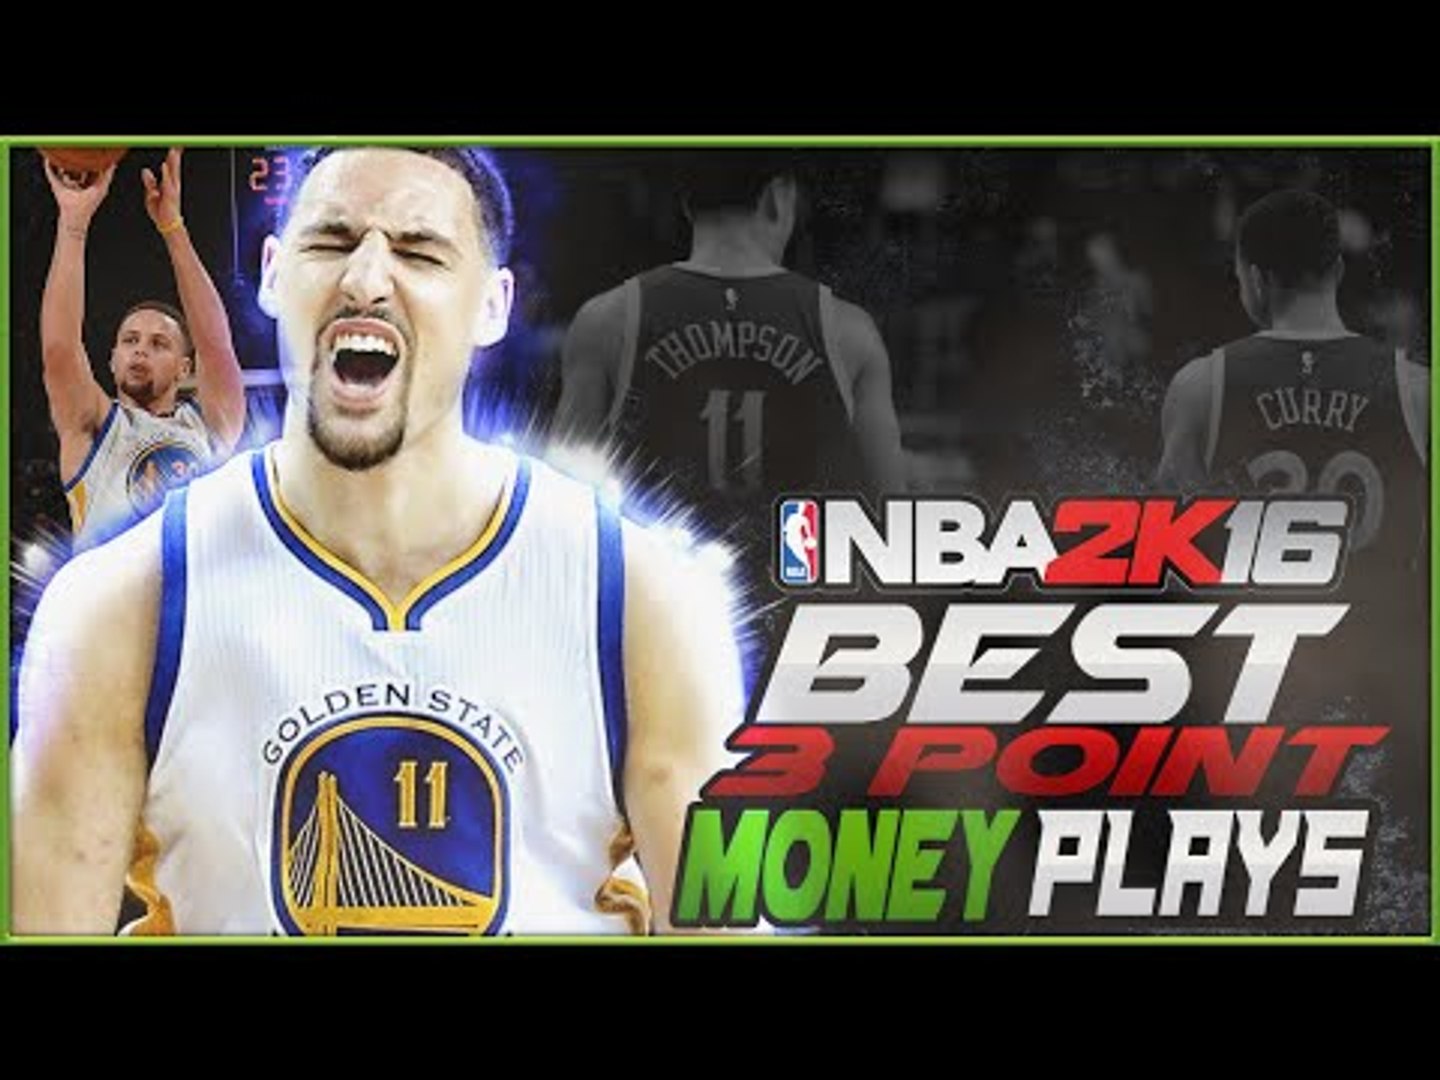 NBA 2K16 Best 3 Point Money Plays! Top Money Plays for Easy Points in NBA 2K16